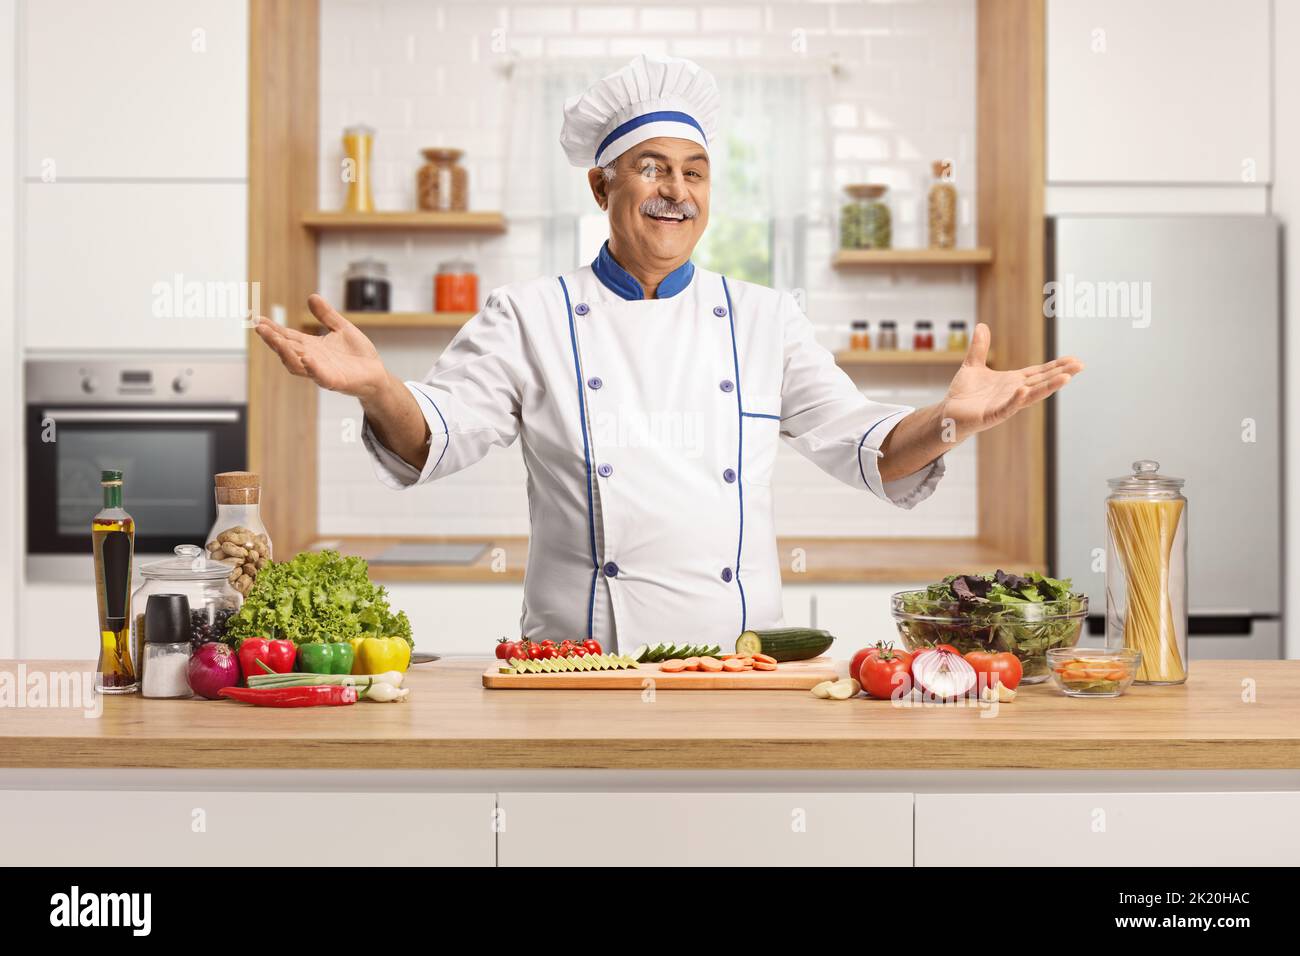 Mature male chef spreading arms behind a kitchen counter and smiling at camera Stock Photo